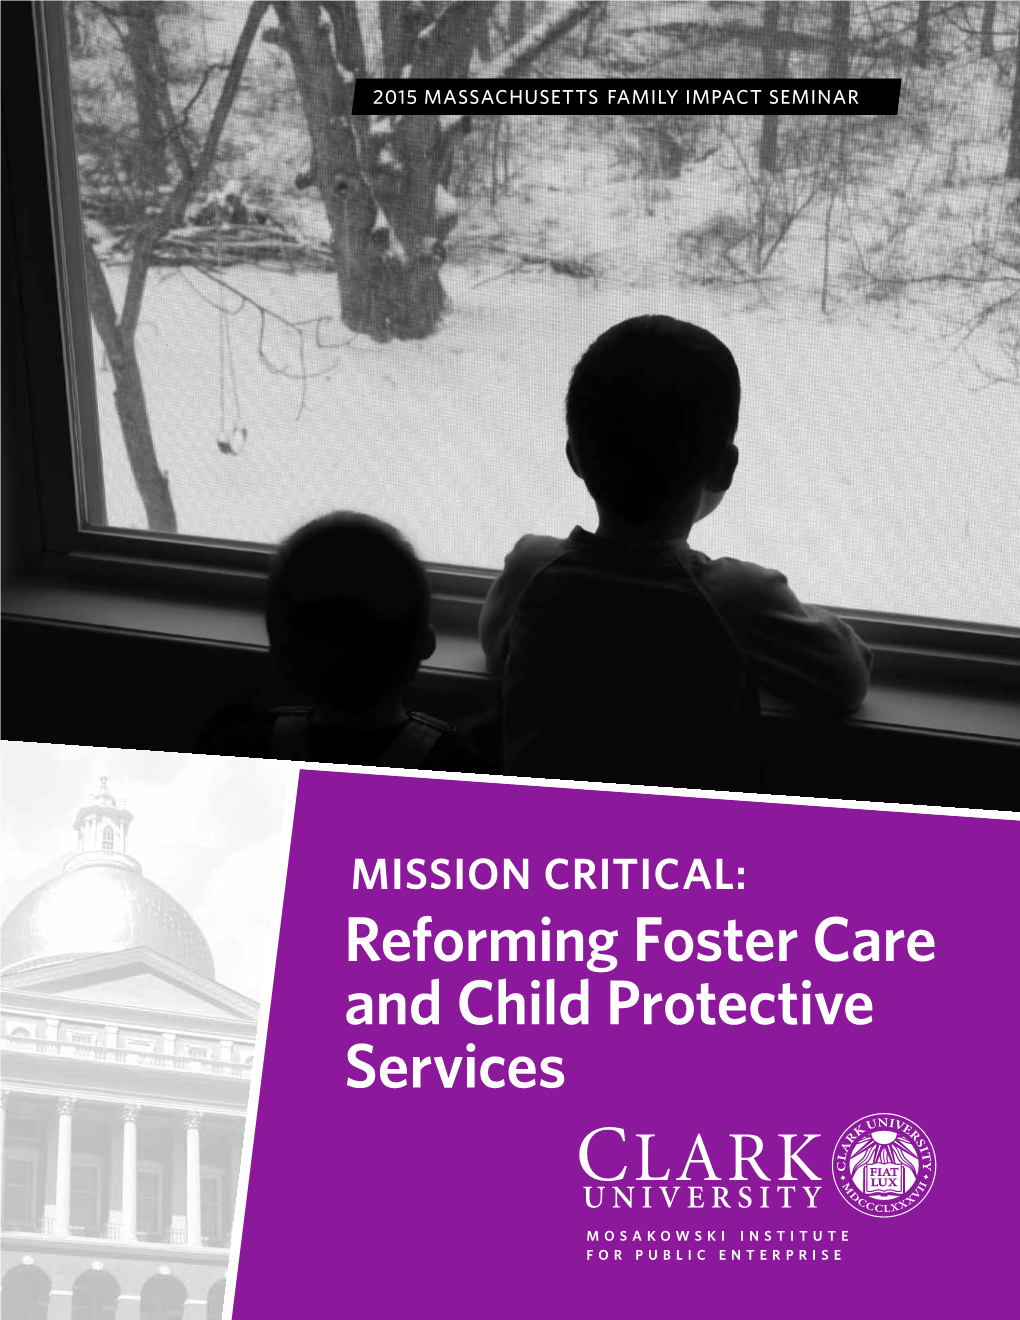 Reforming Foster Care and Child Protective Services